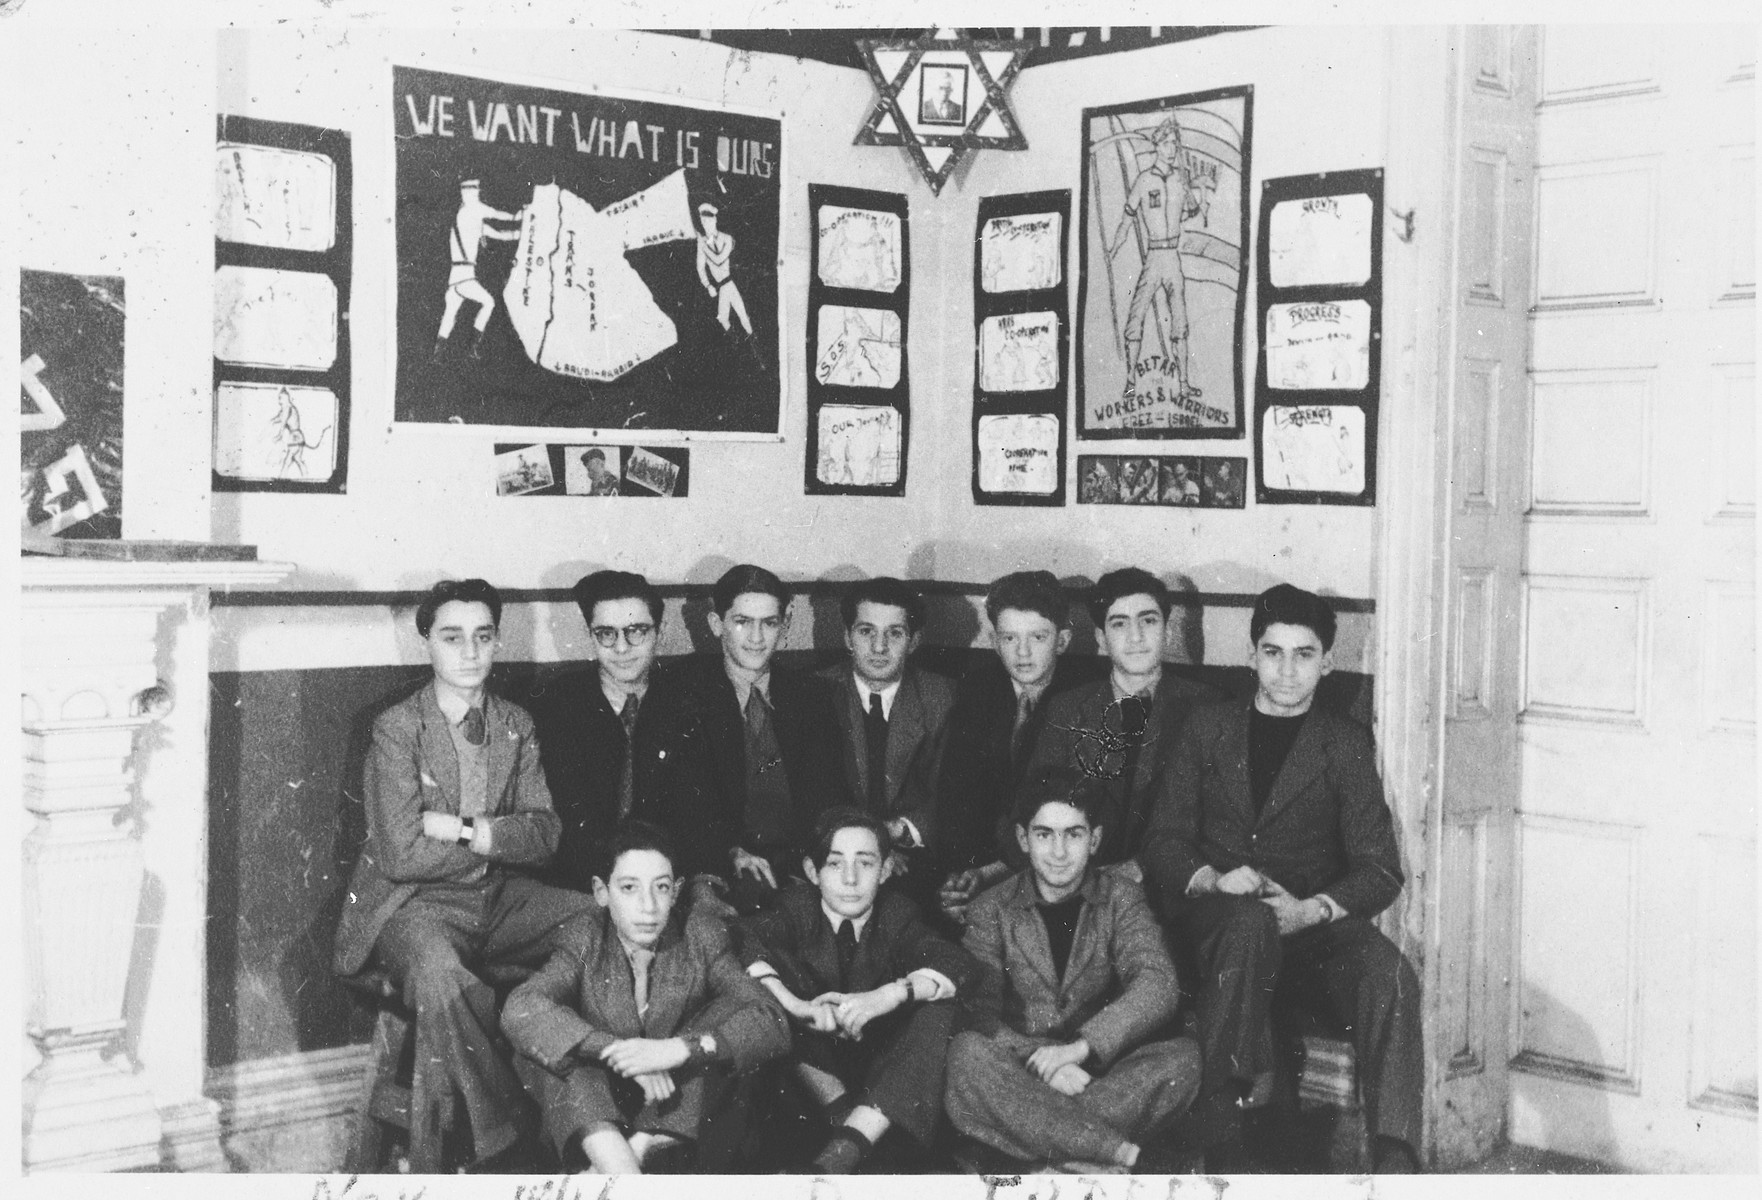 Members of the Revisionist Zionist youth group in Shanghai pose in front of a wall of posters and photographs.